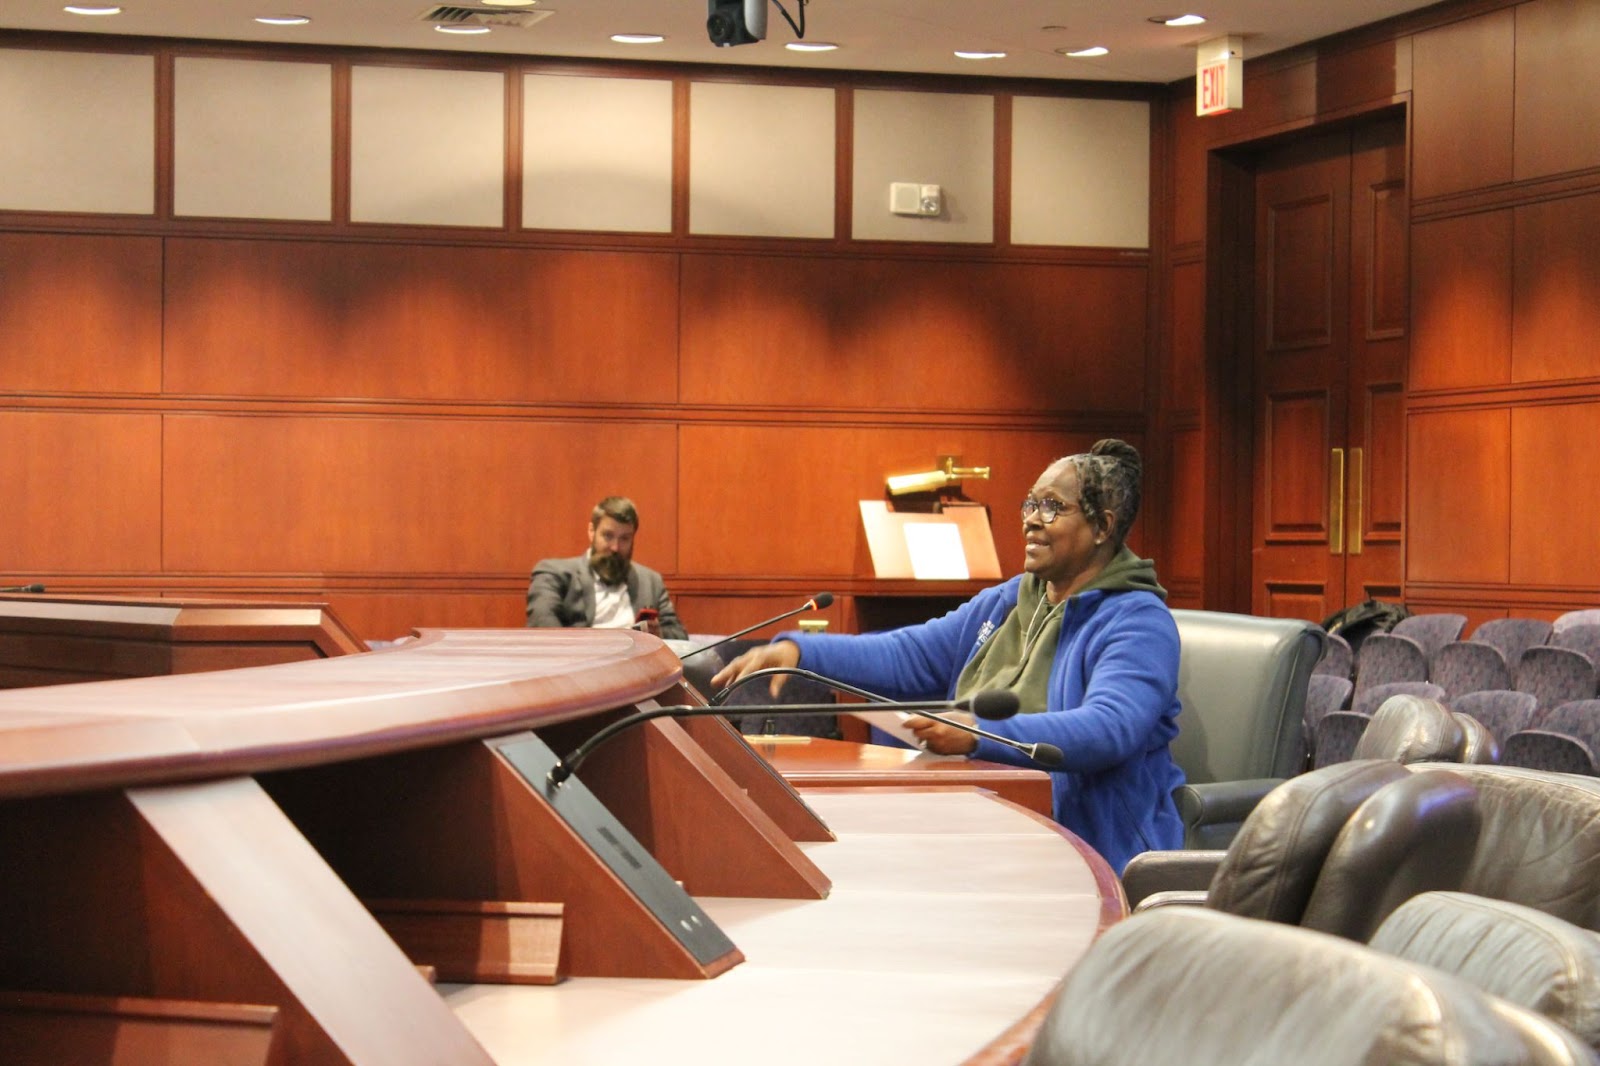 Inside the housing committee room in the capitol building in Hartford, Connecticut, Terri Ricks, a female Smart Justice advocate testifies on behalf of equitable housing.